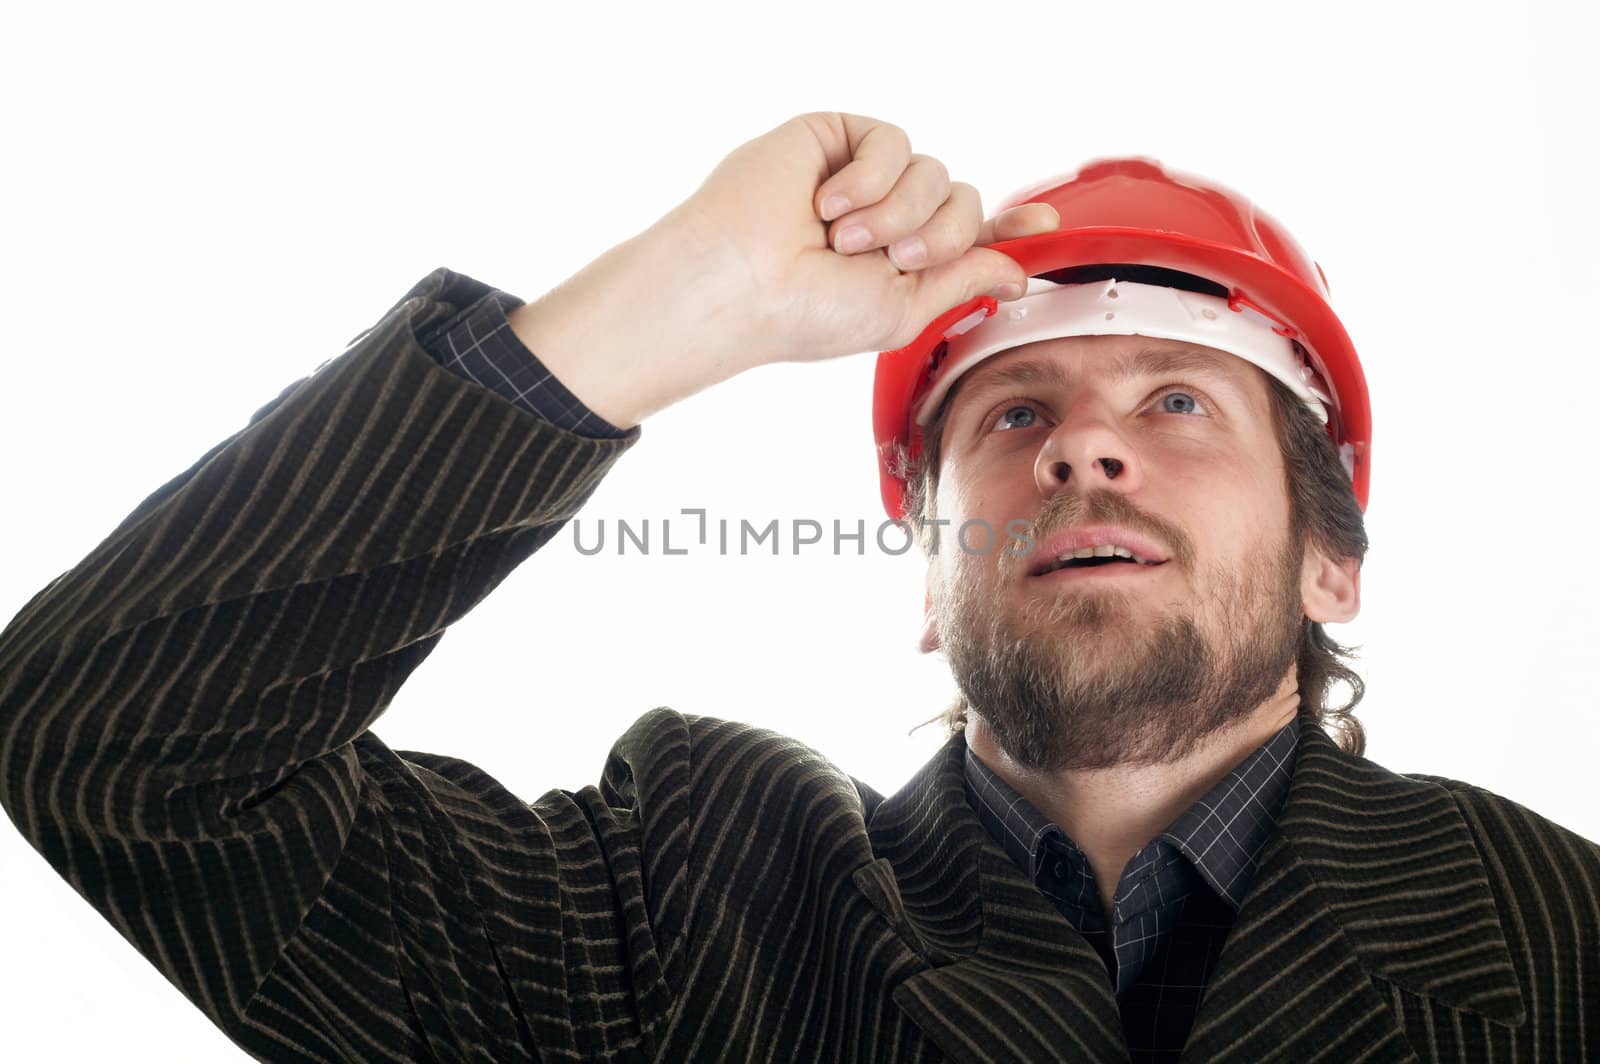 An image of worker in a red helmet